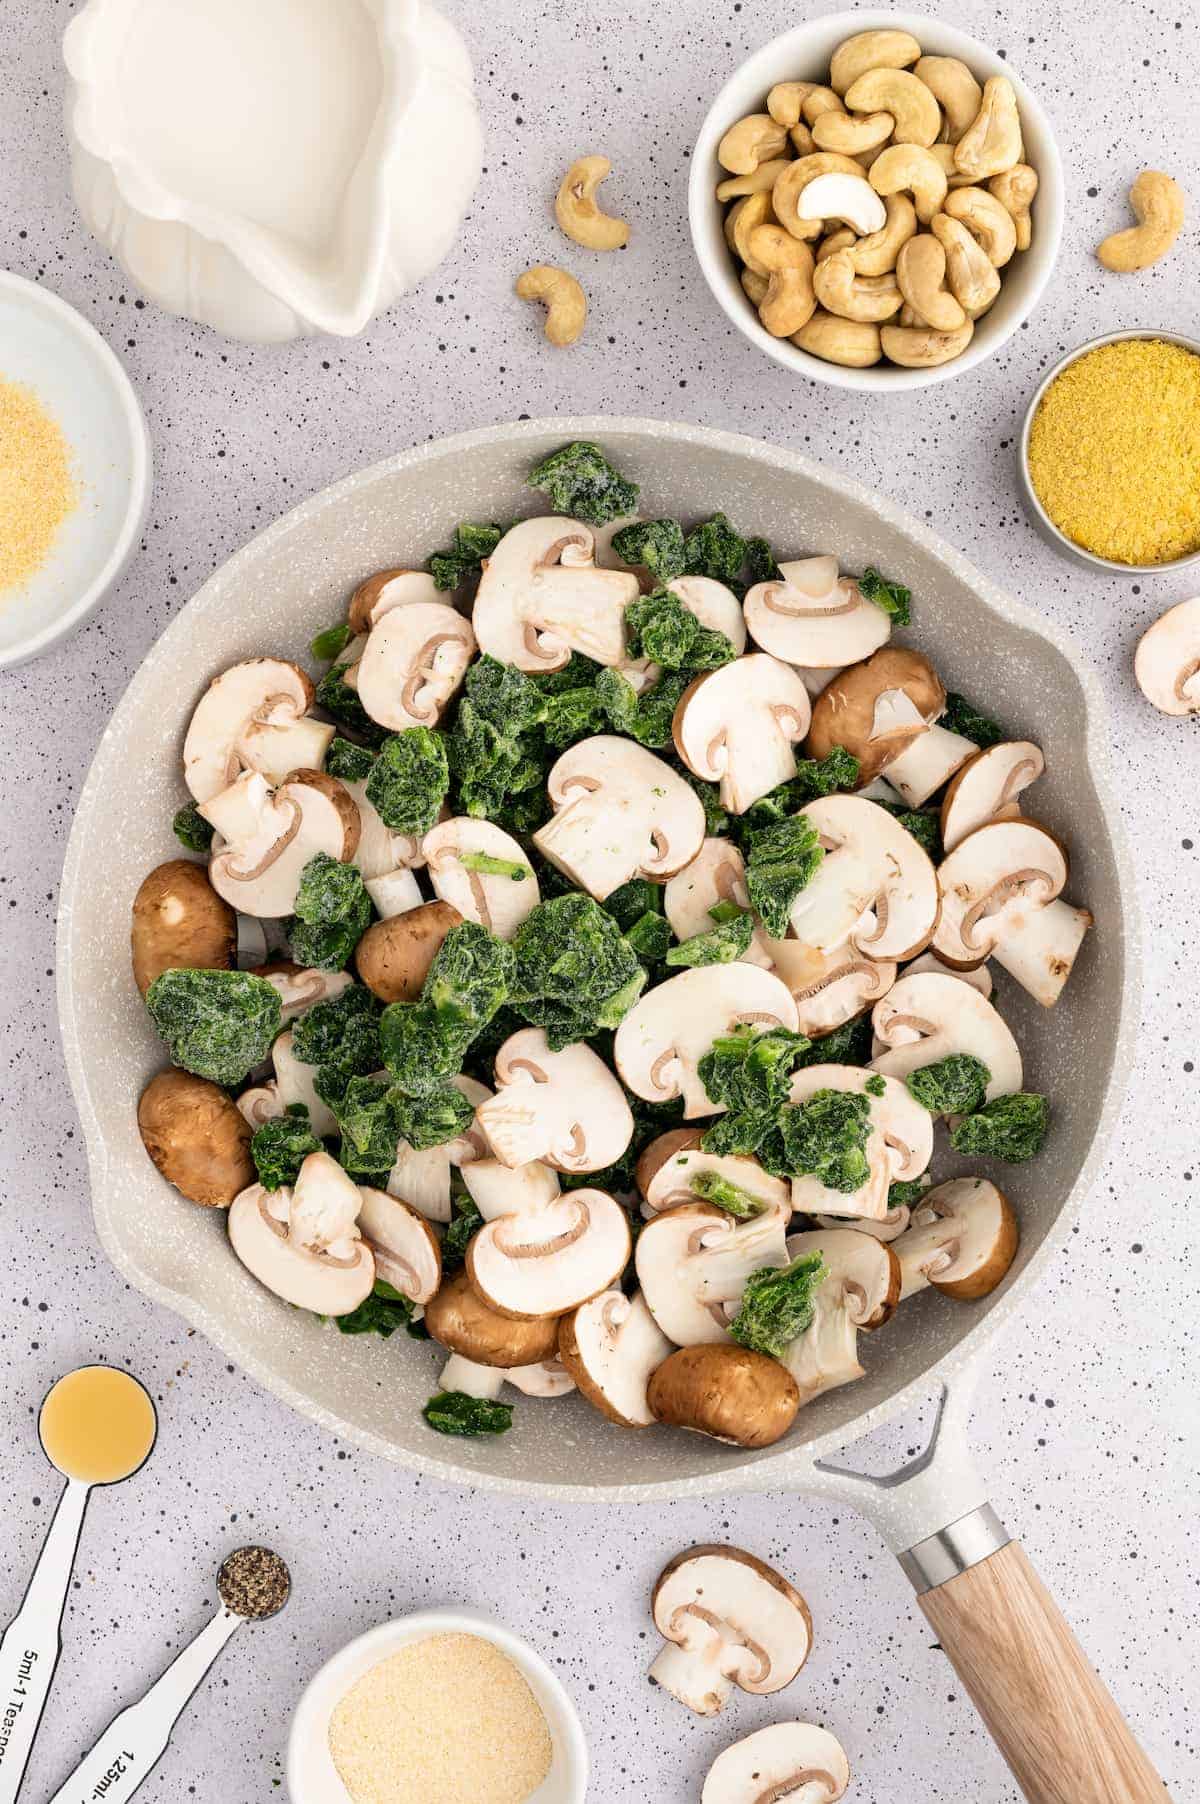 Mushrooms and spinach in a sauté pan.